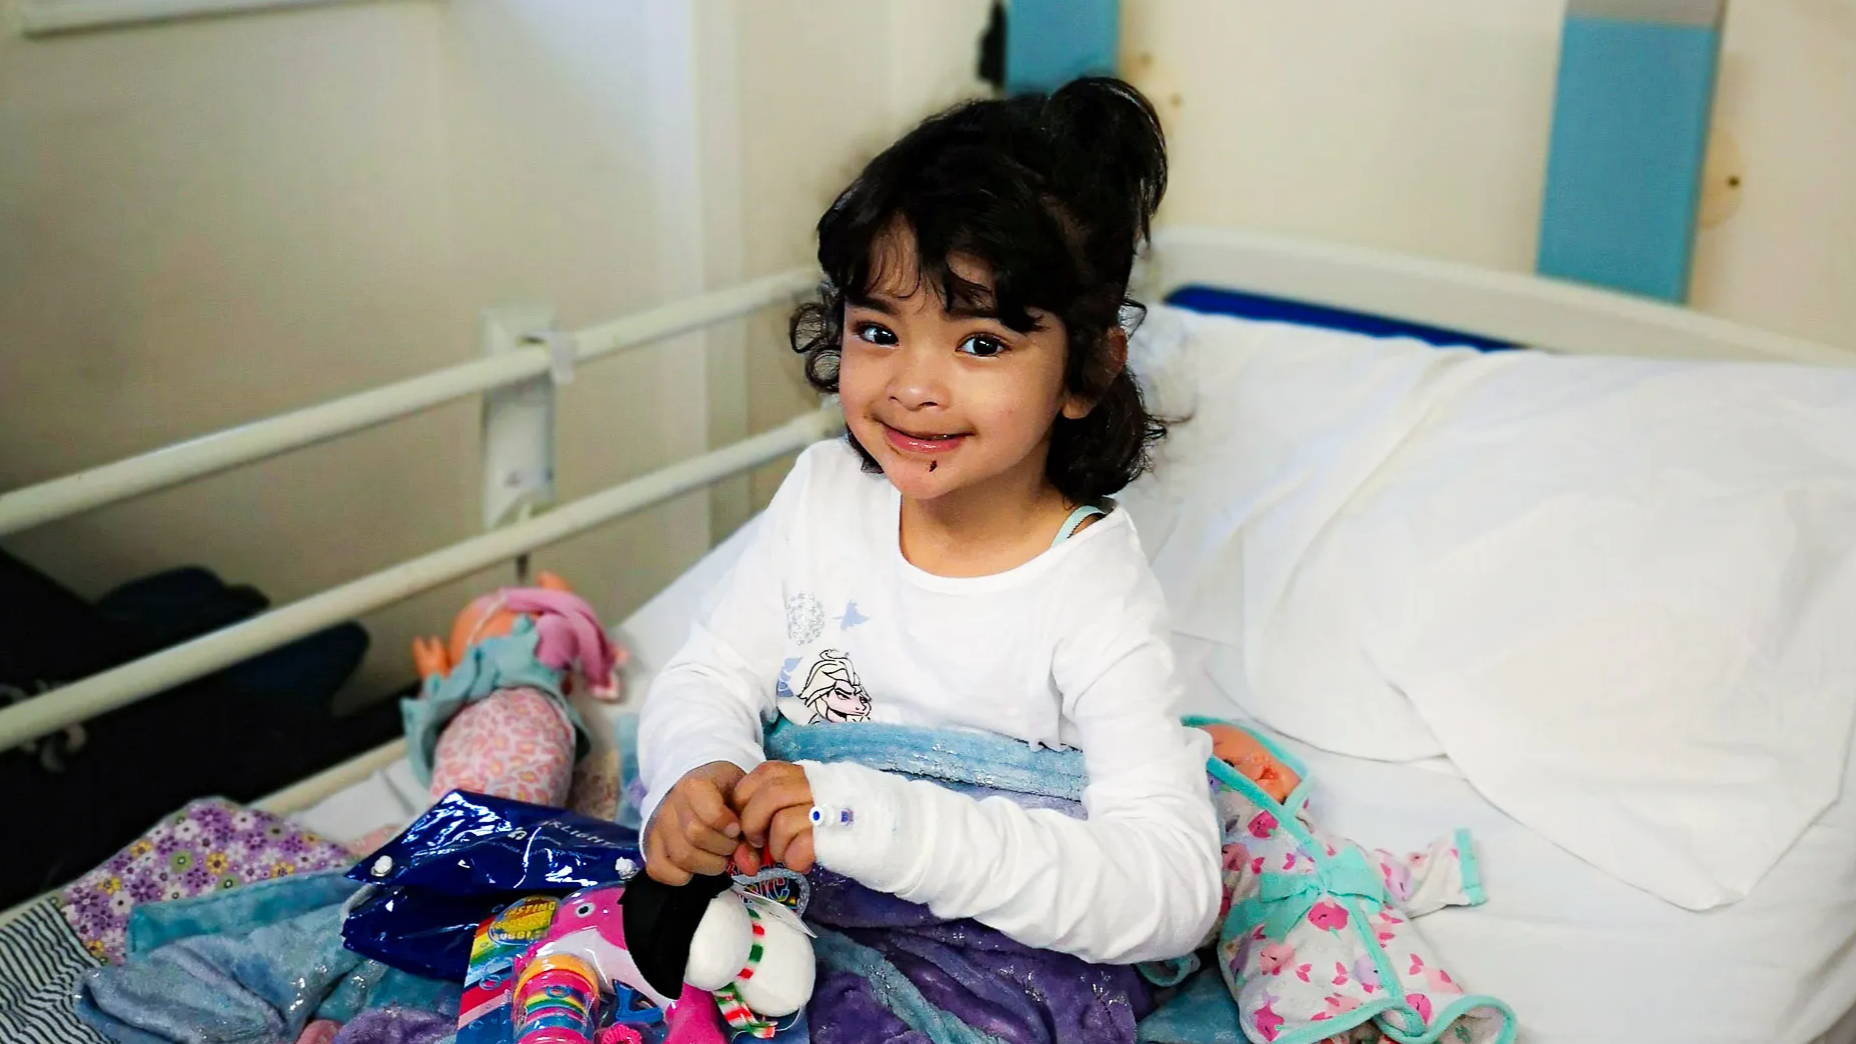 A child with play toys smiling in her hospital bed.